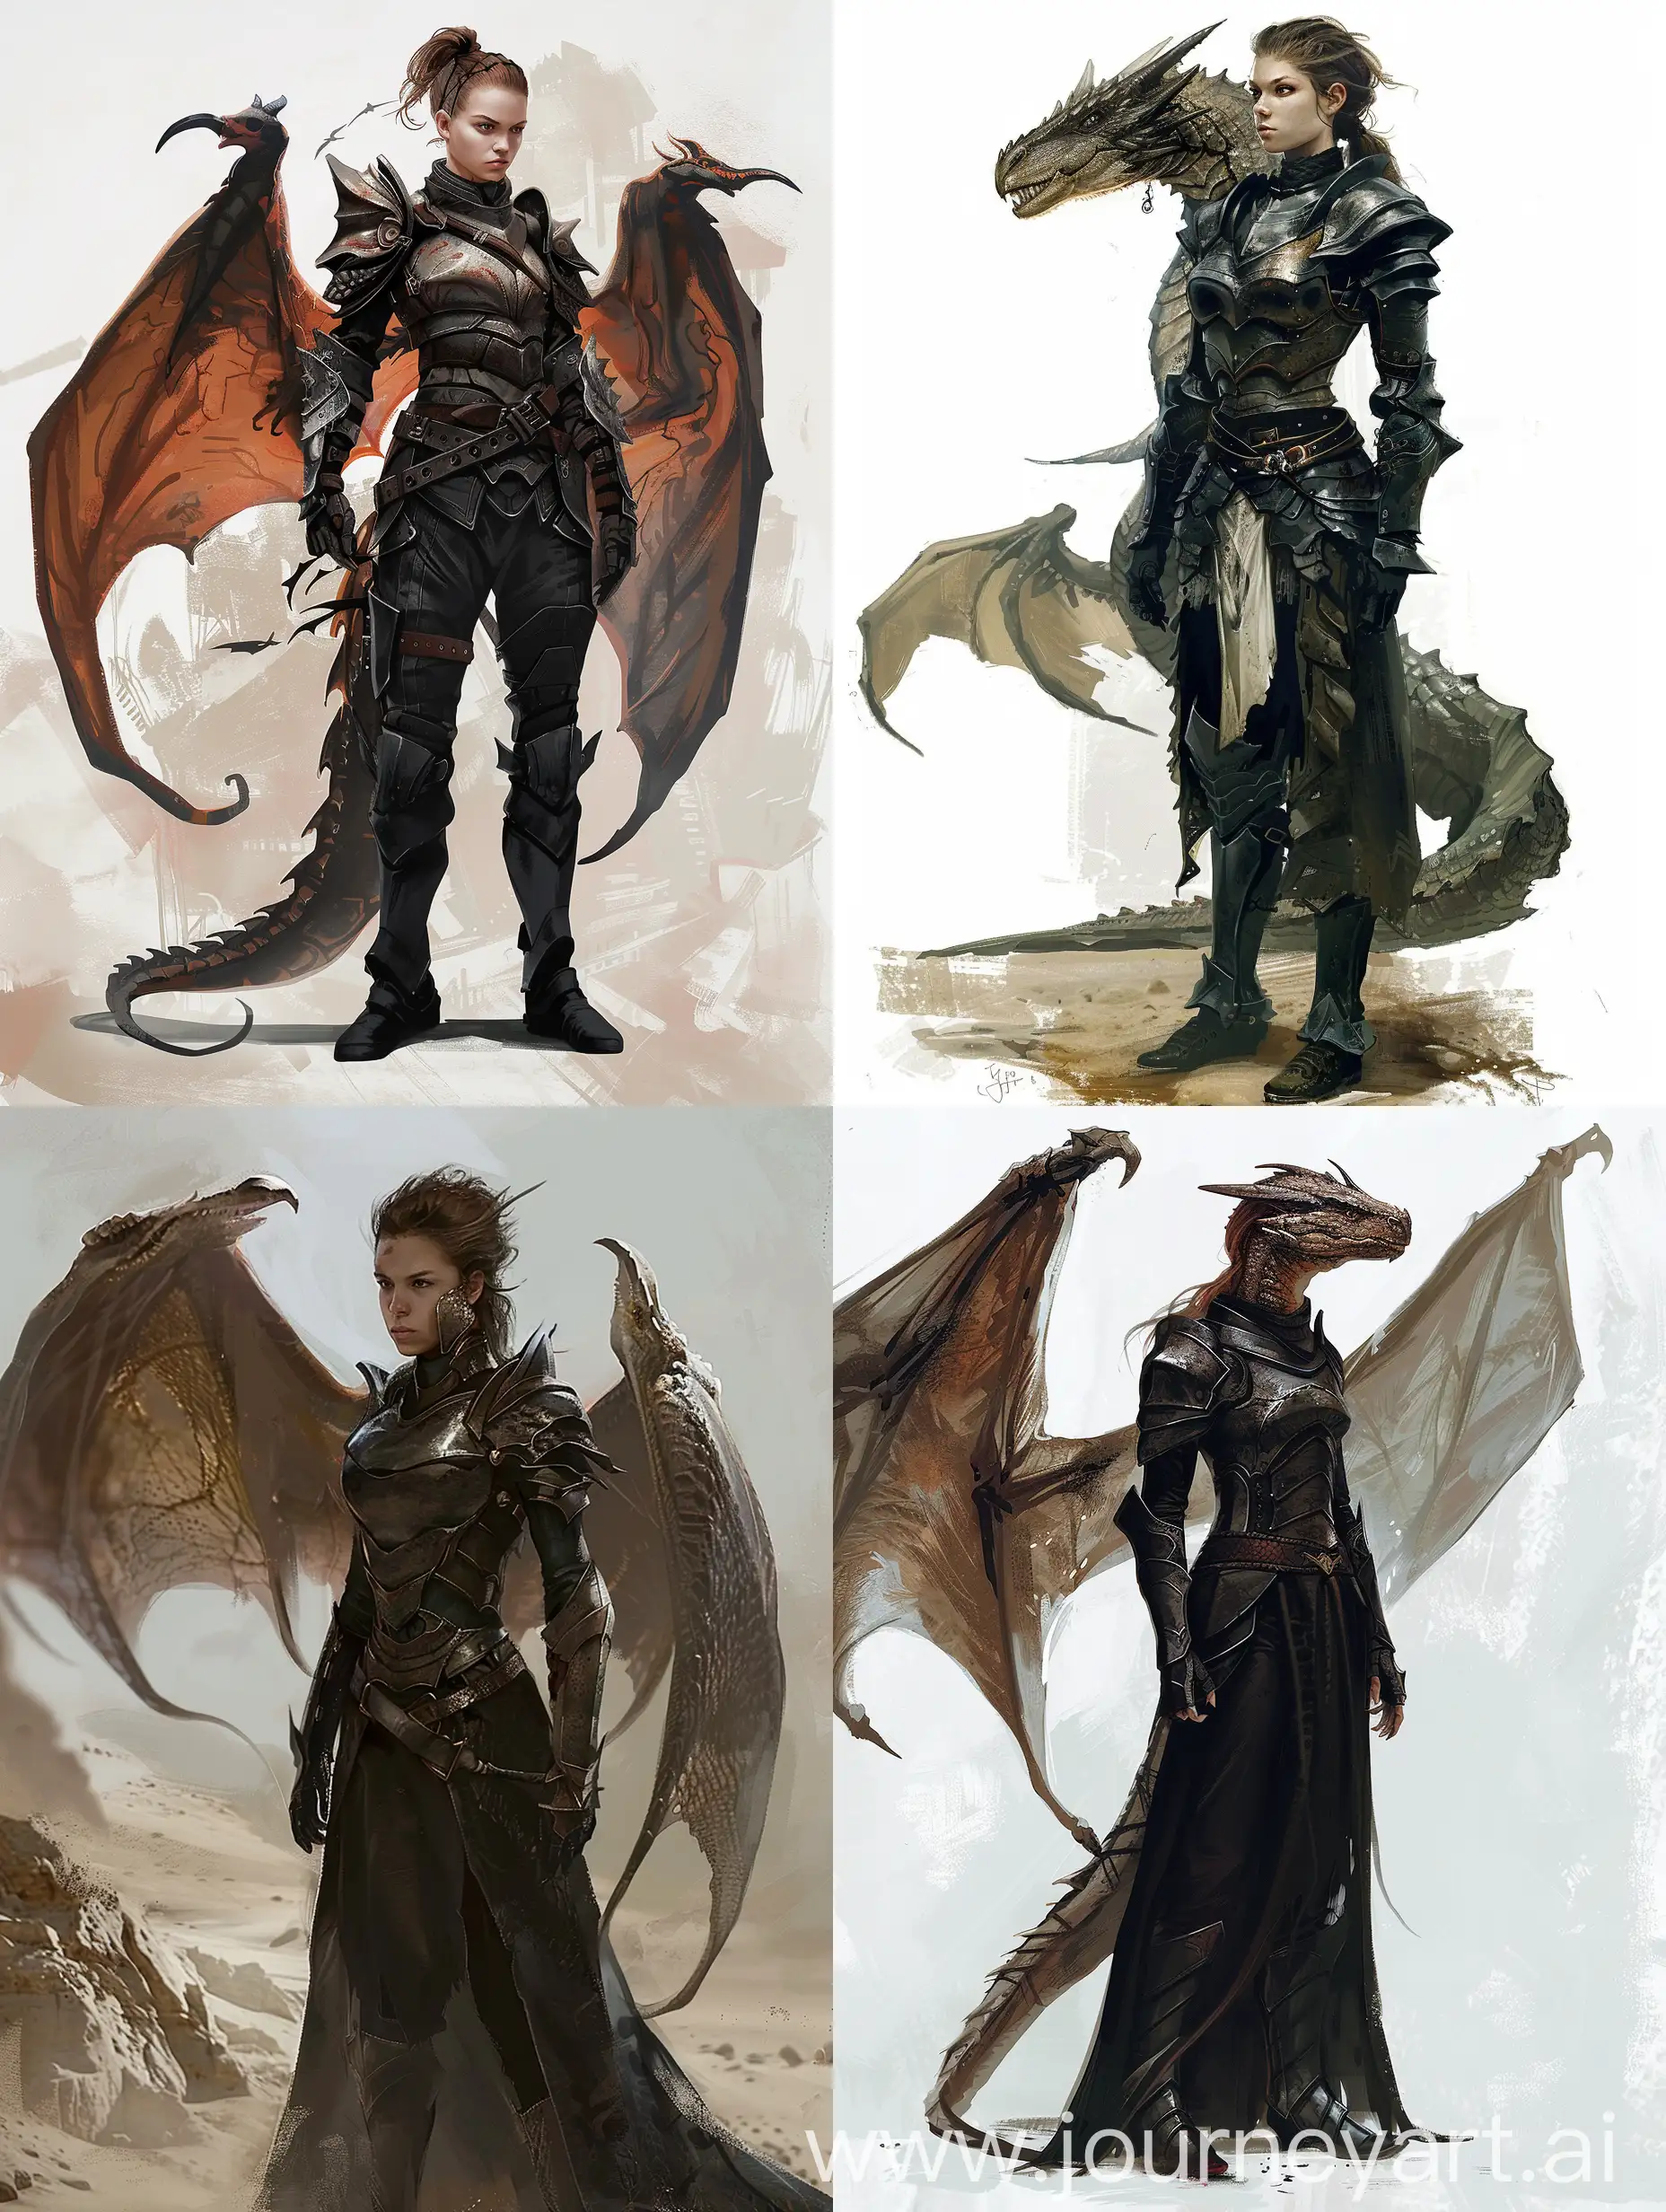 game art, concept, dragon in human form, woman in black armour